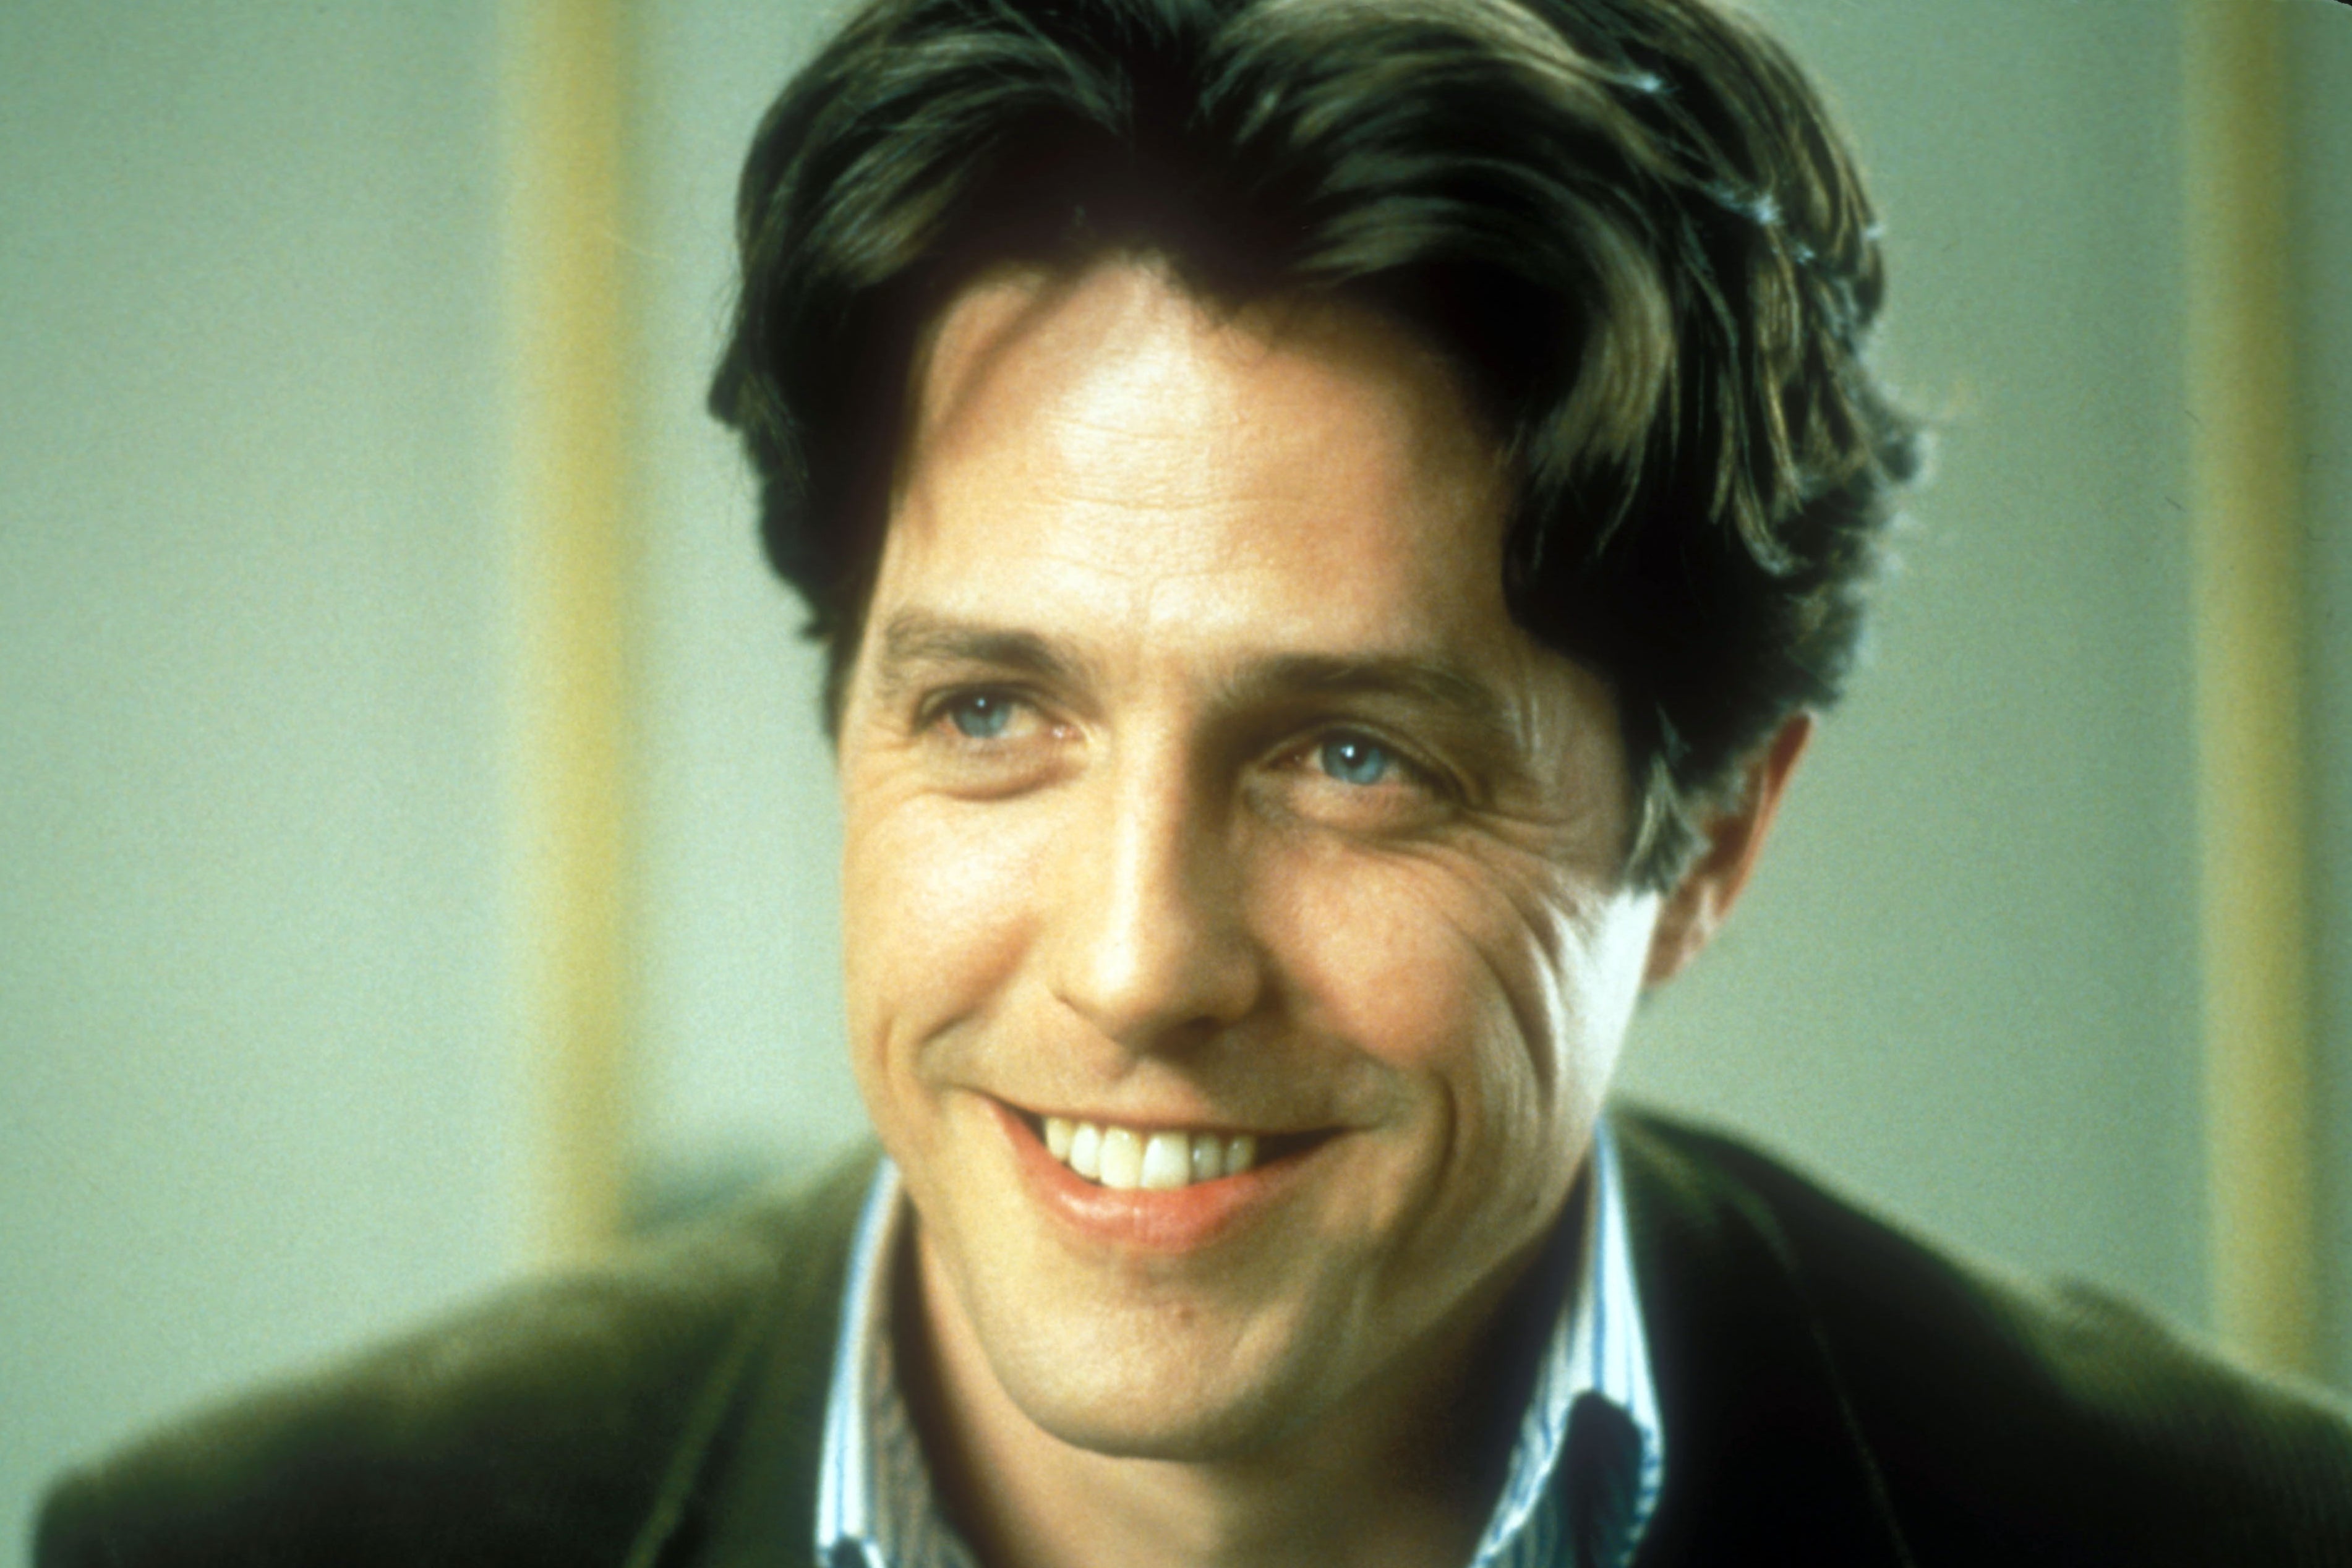 His loveable, floppy-haired prime: Hugh Grant in his 1999 romcom classic ‘Notting Hill’